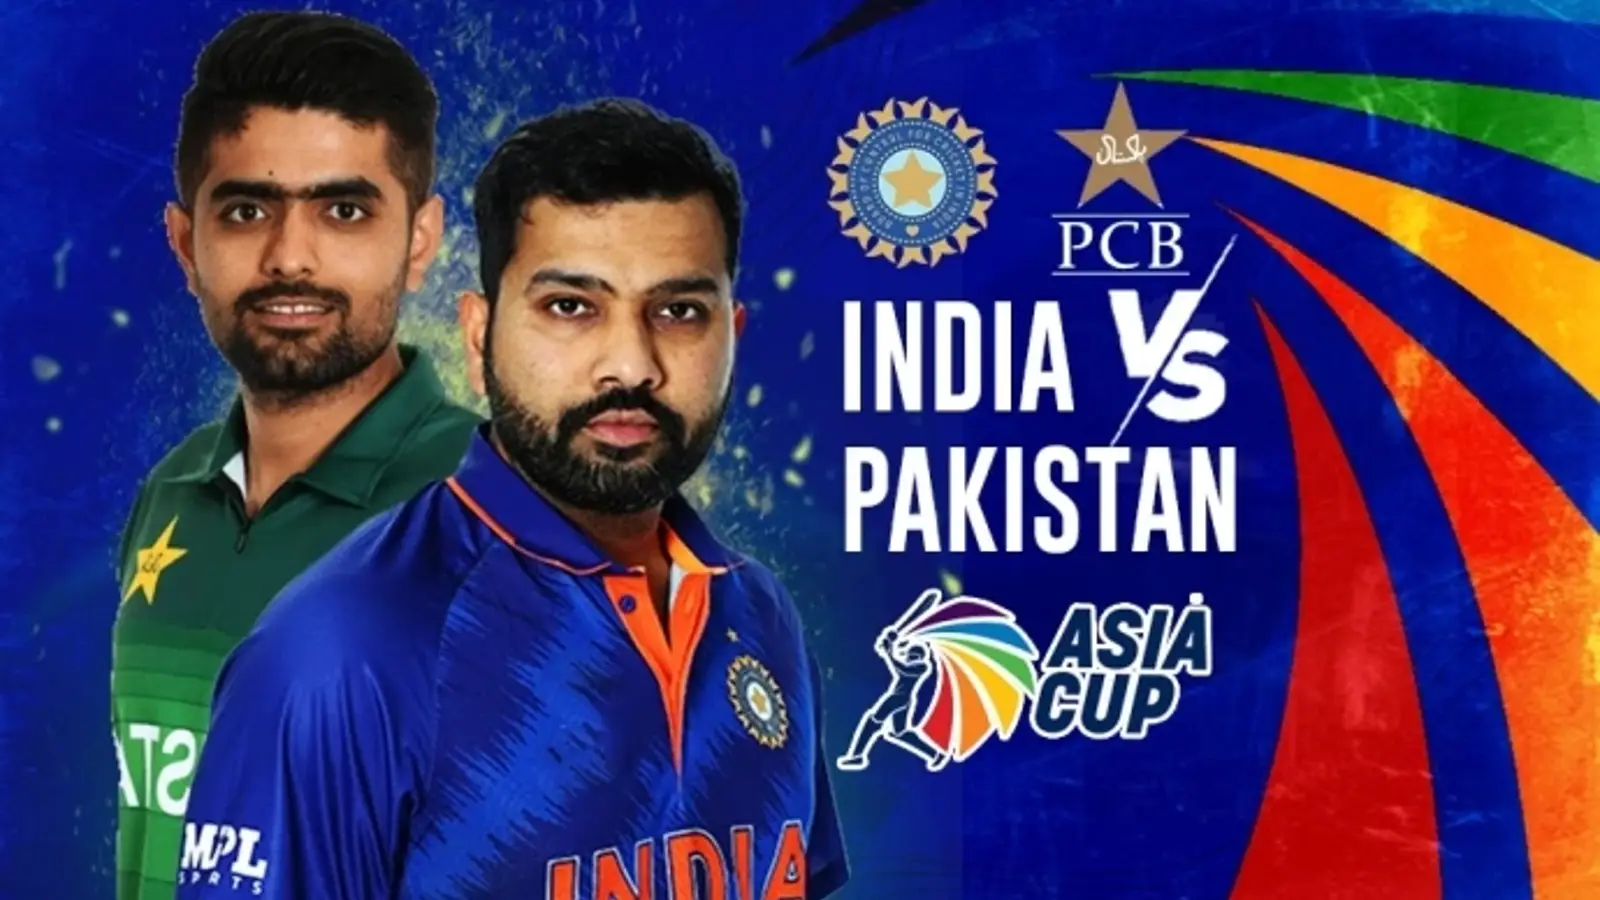 Asia Cup 2022: India Vs Pakistan; the battle for the Asian Dominance